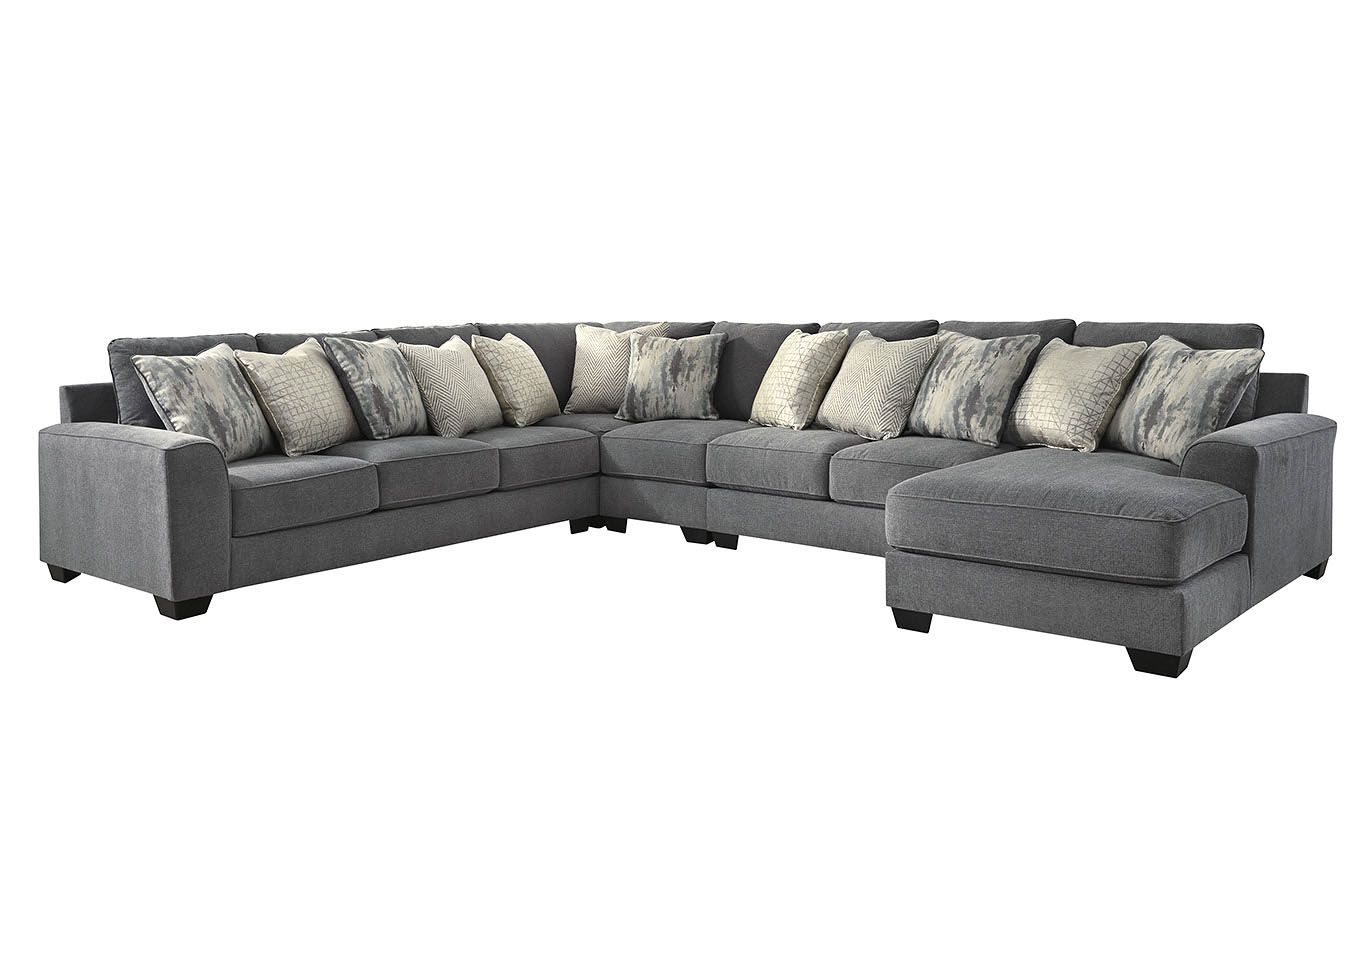 Castano Jewel 5 Piece Chaise Sectional Ashley Furniture Homestore For 5 Piece Console Tables (View 16 of 20)